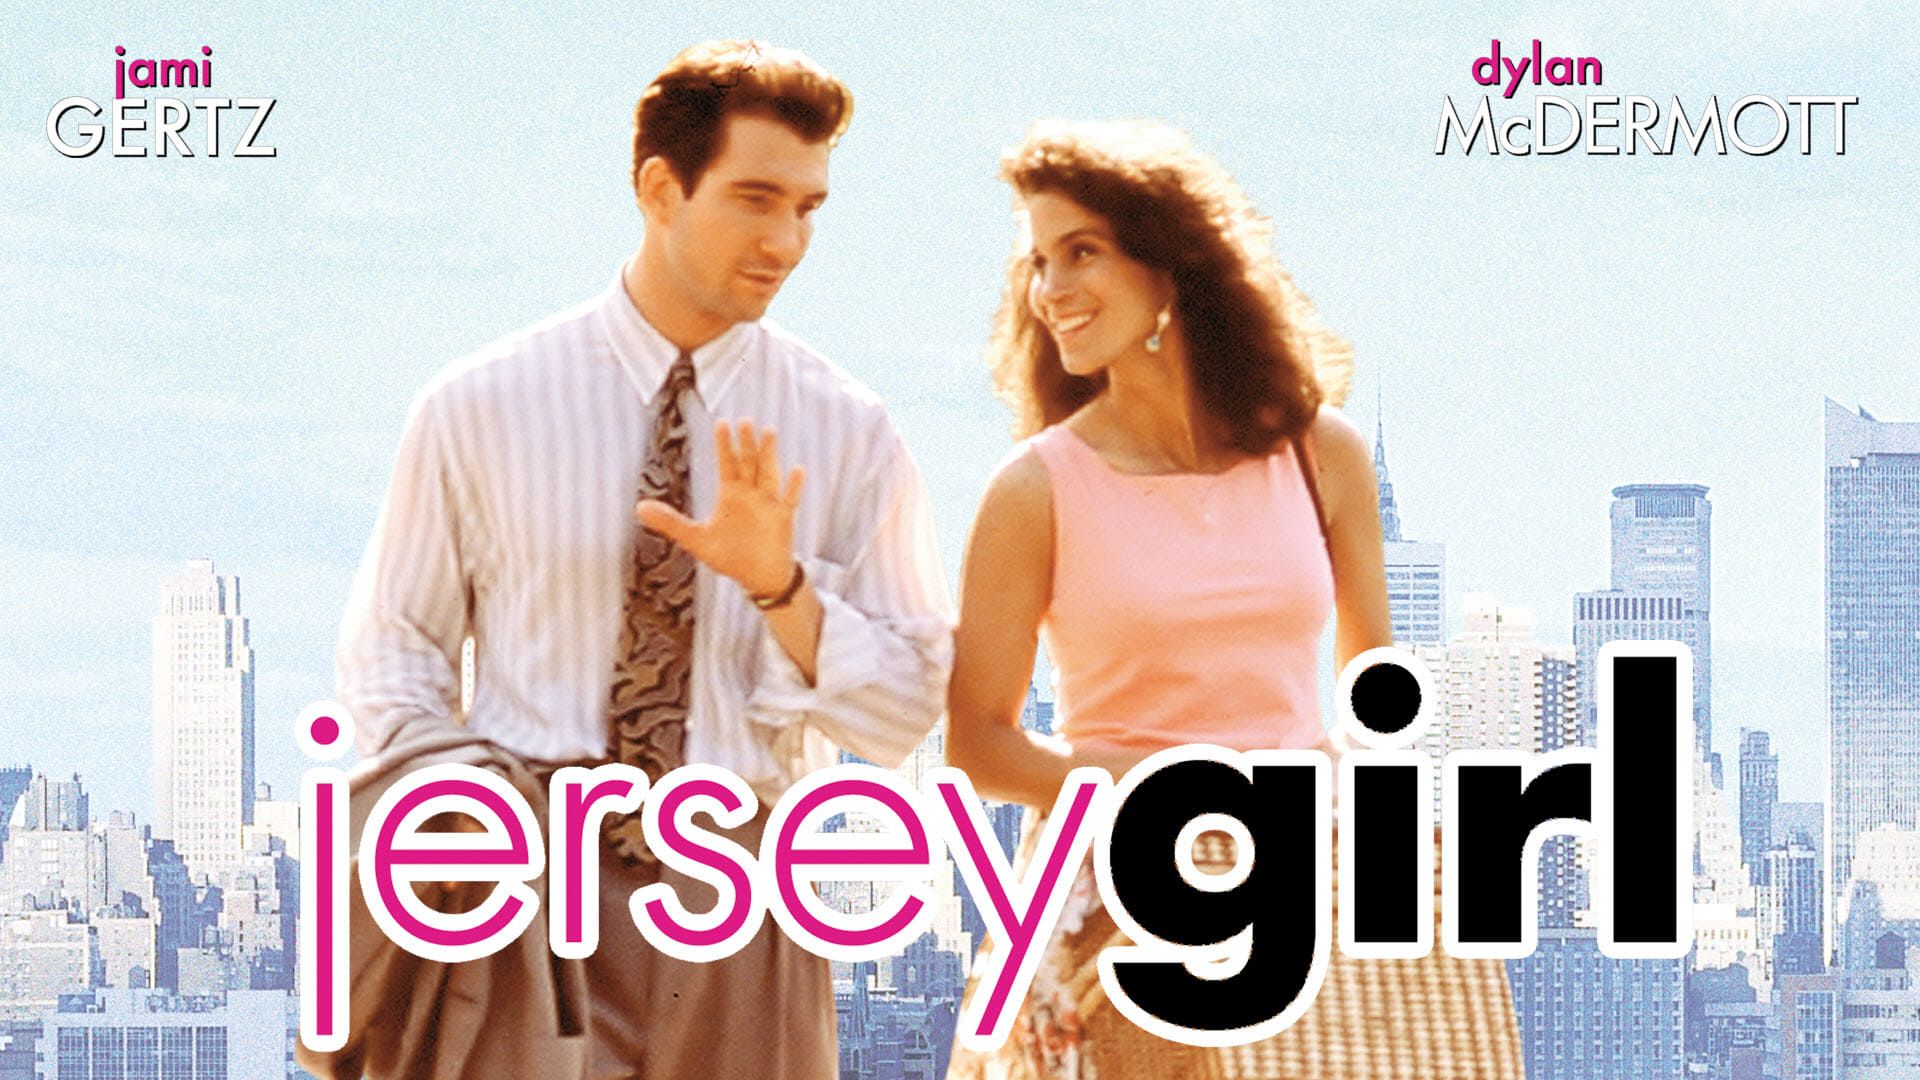 Jersey Girl background